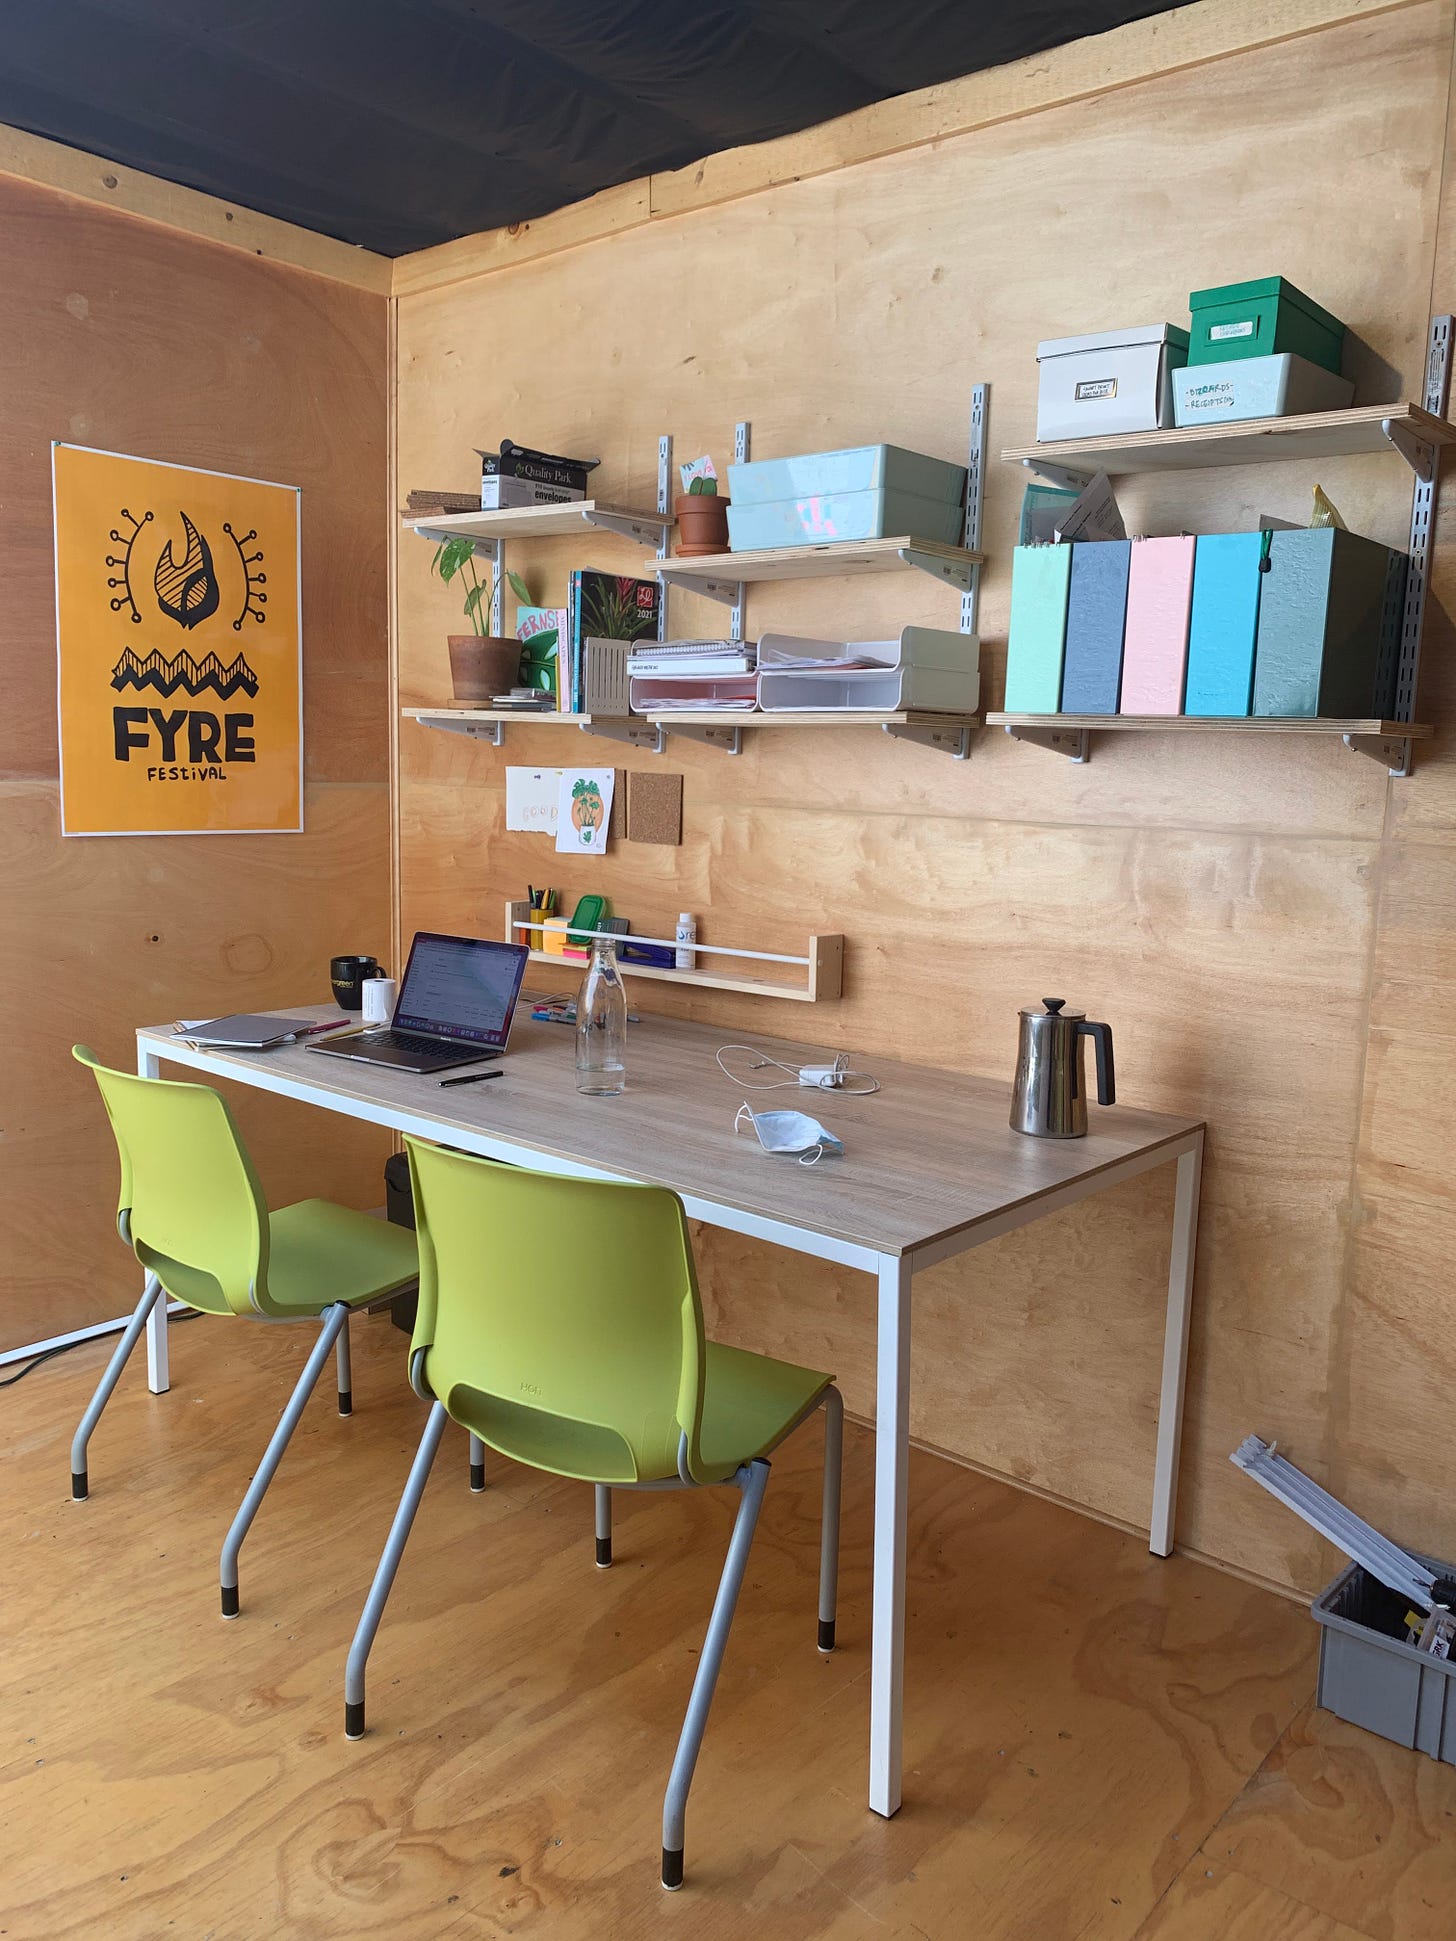 tidy office desk with yellow FYRE Festival poster on the wall